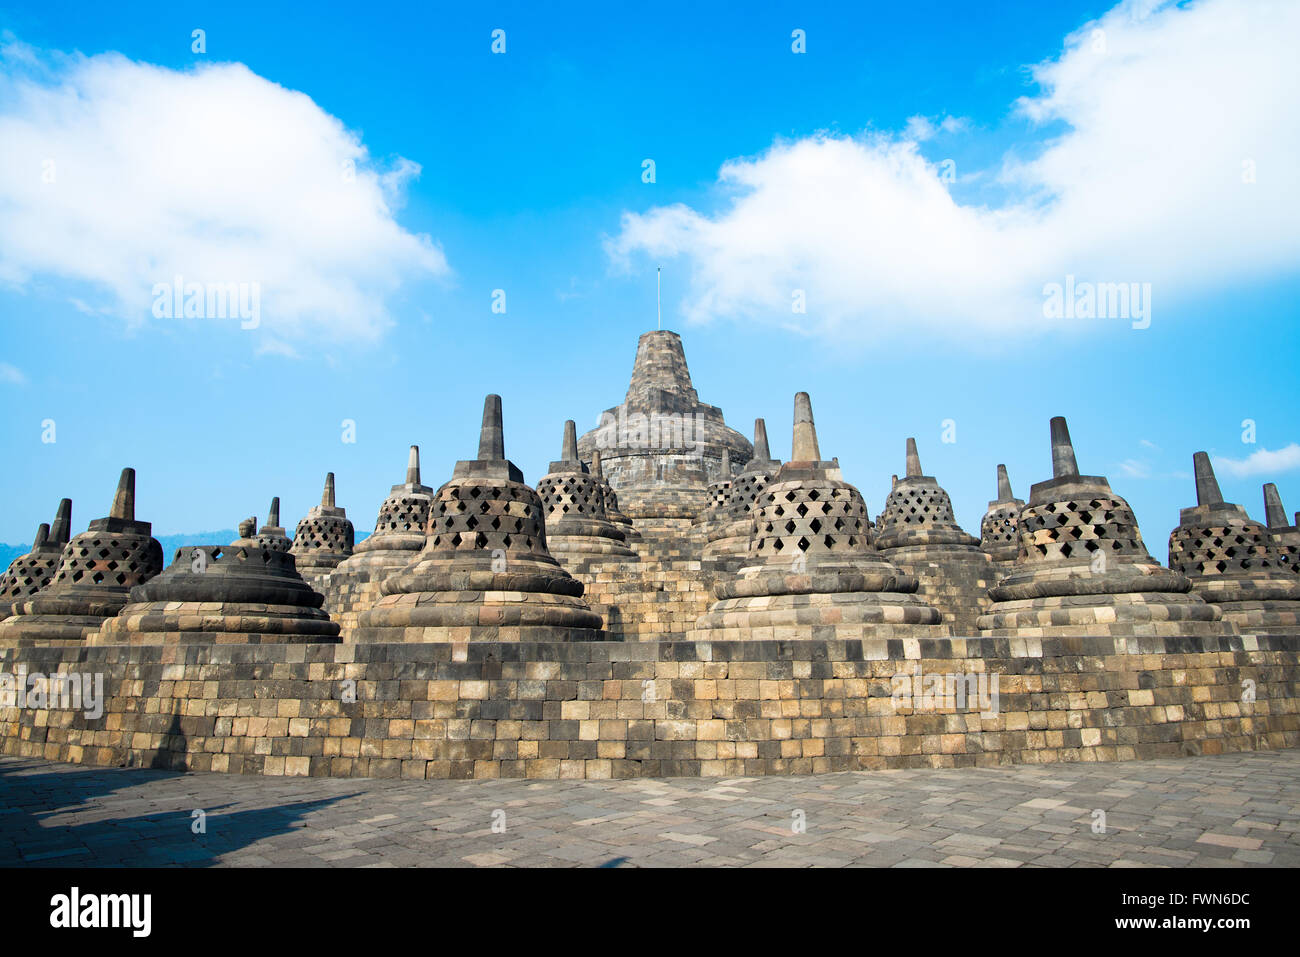 Main dome of Borobudur surrounded by perforated stupas on the circular platform. Stock Photo